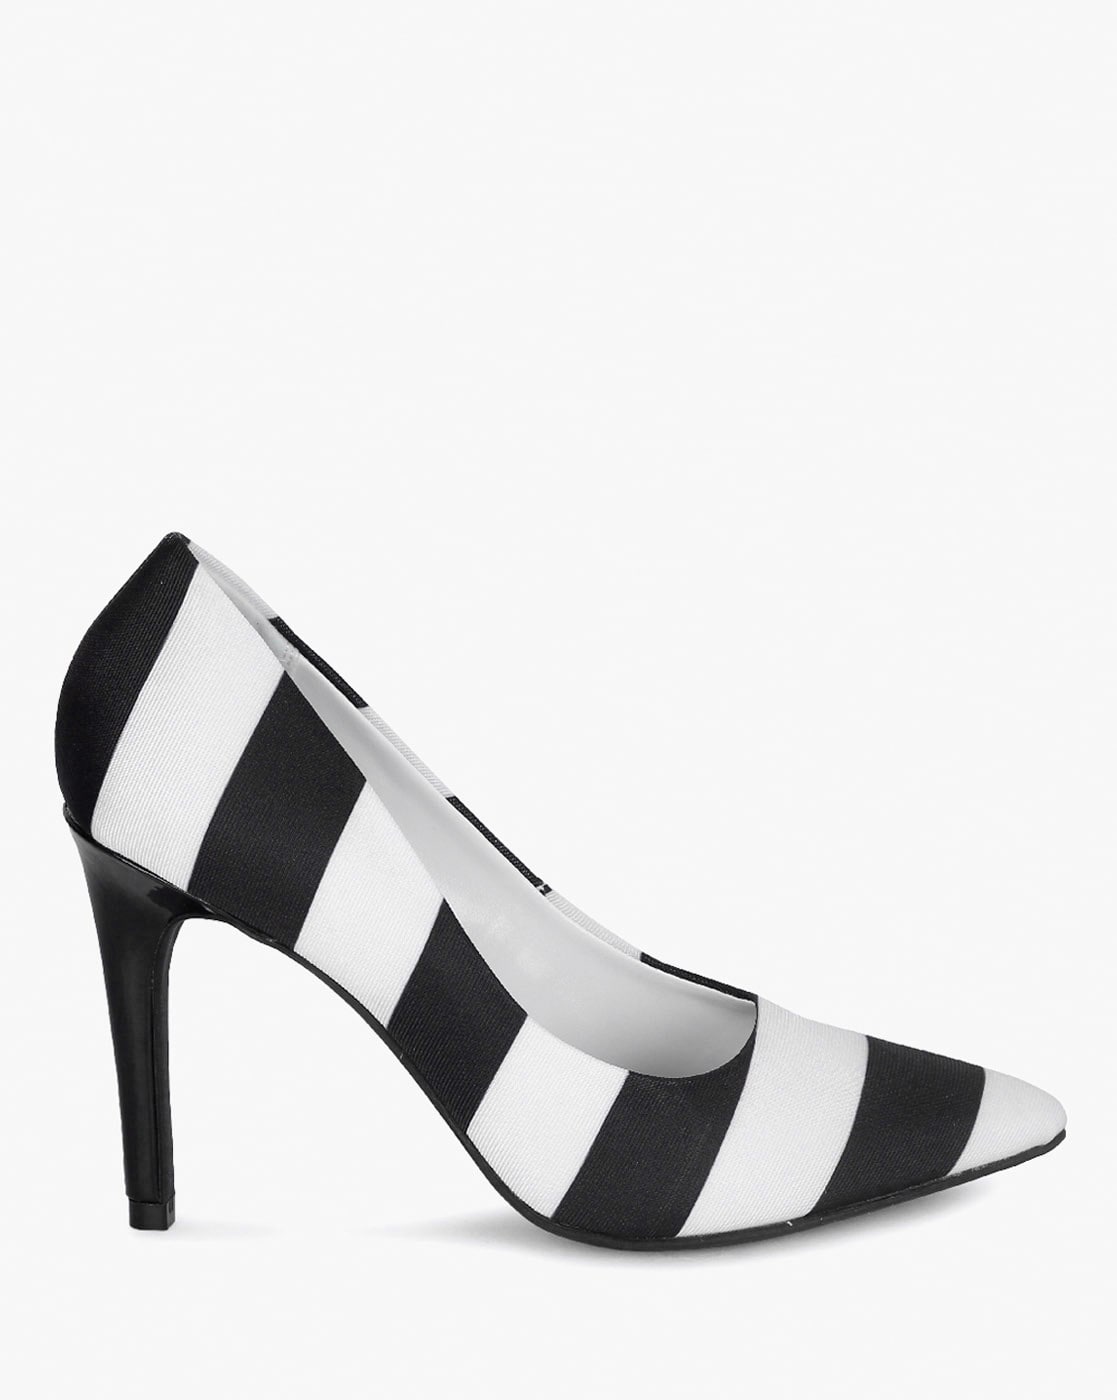 christian siriano shoes online